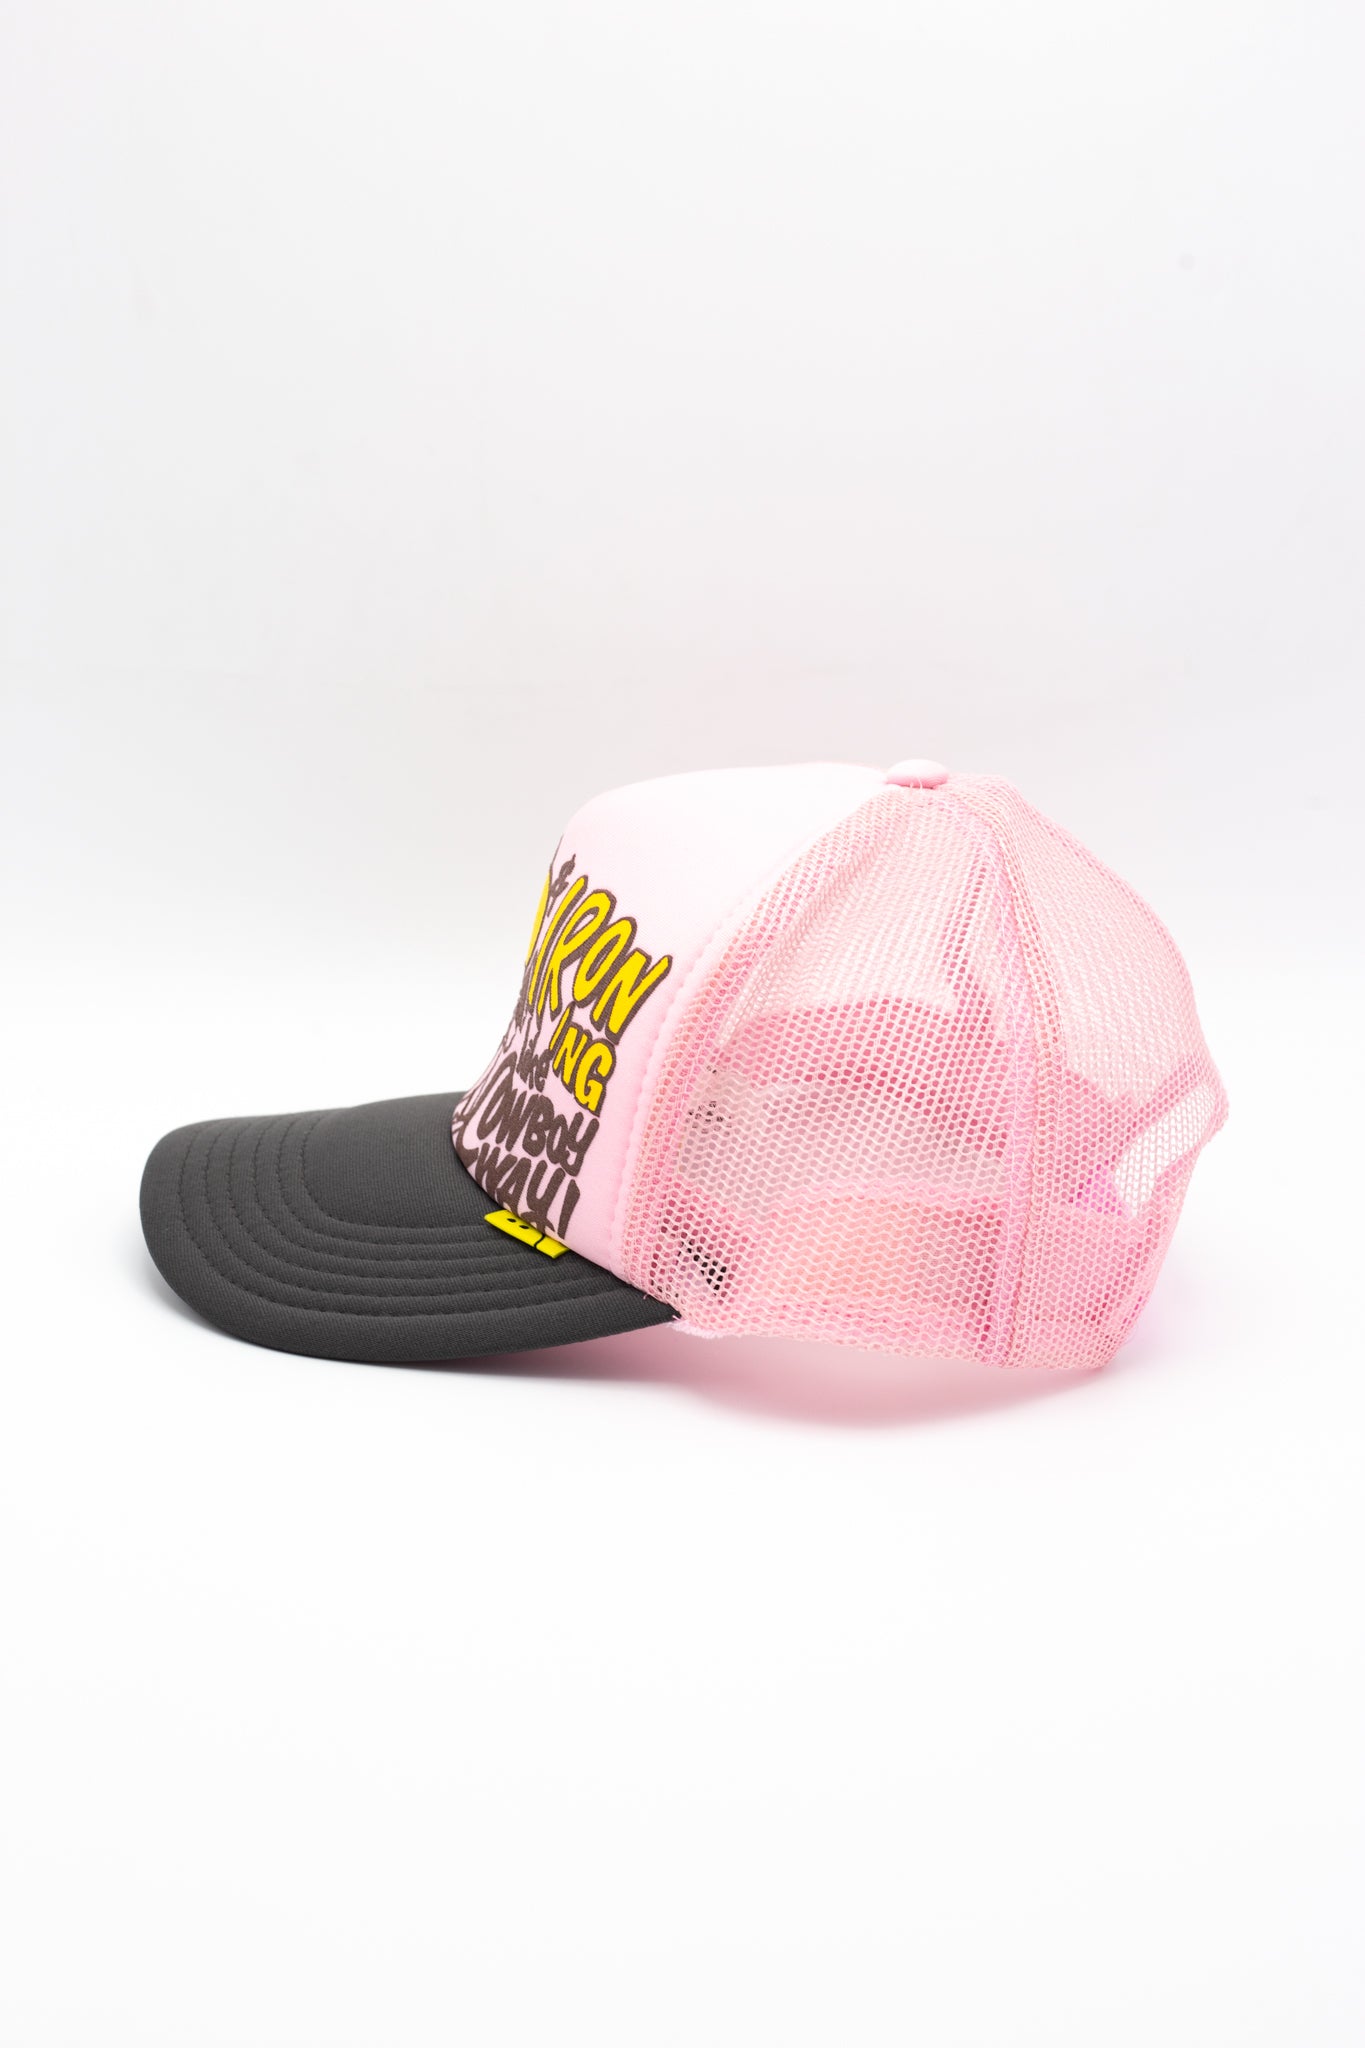 CONEYCOWBOWY Trucker Cap - Pink x Charcoal Grey